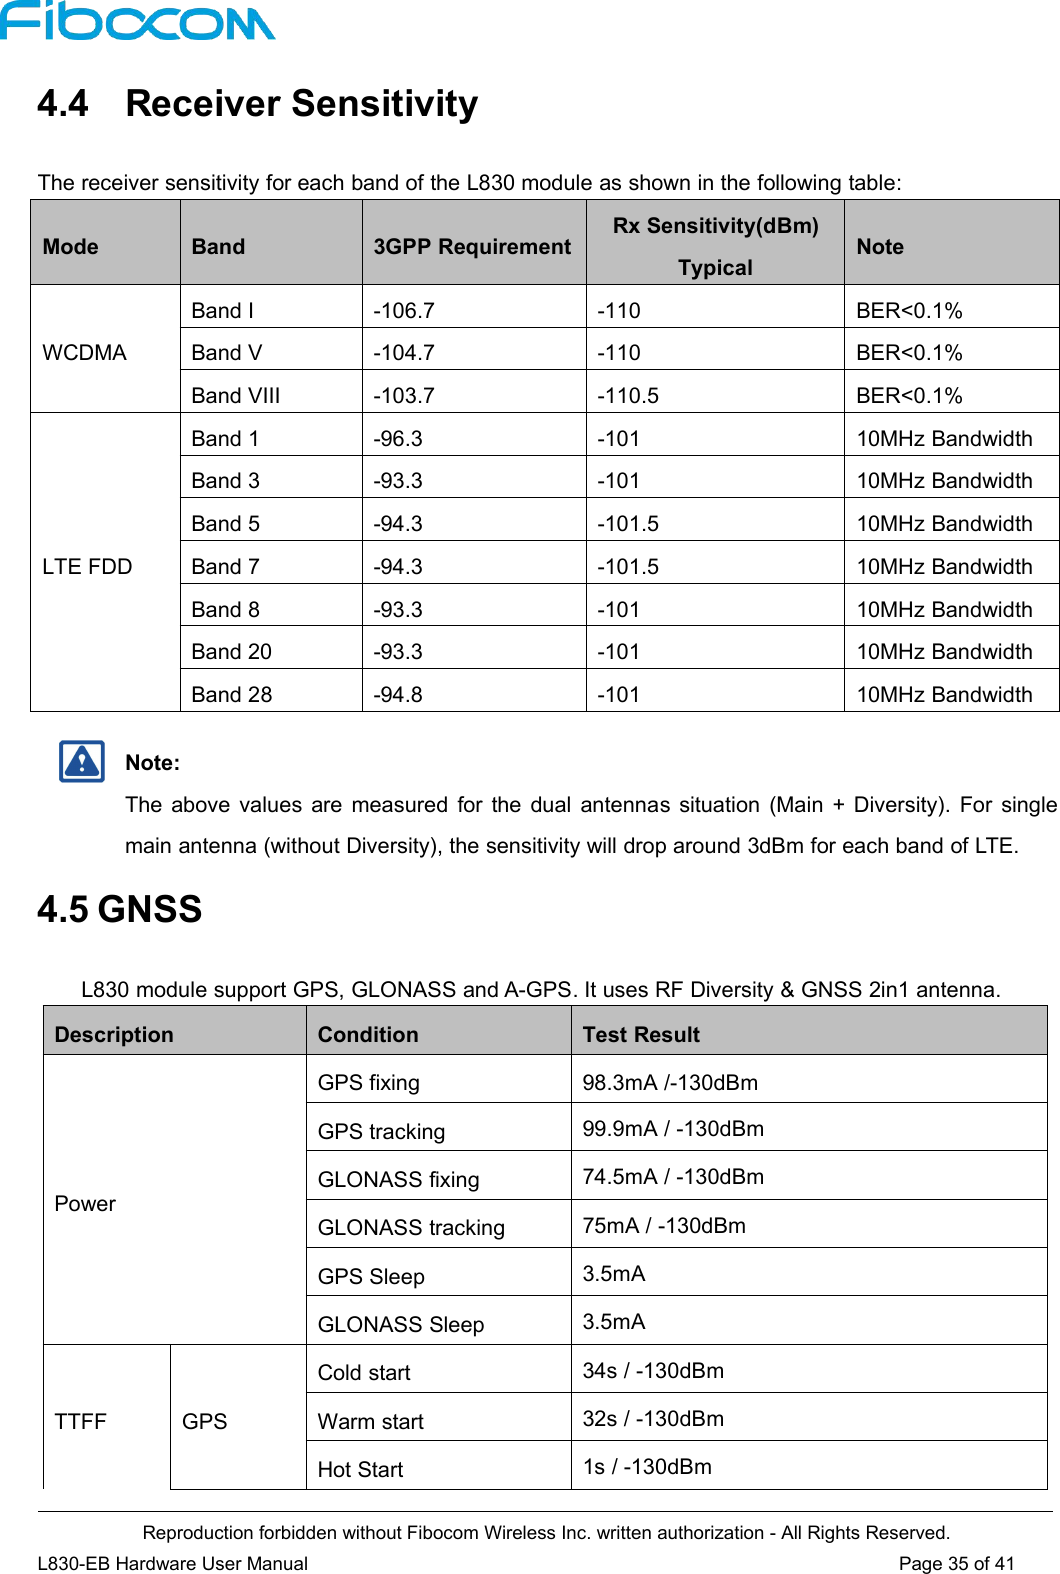 Reproduction forbidden without Fibocom Wireless Inc. written authorization - All Rights Reserved.L830-EB Hardware User Manual Page 35 of 414.4 Receiver SensitivityThe receiver sensitivity for each band of the L830 module as shown in the following table:ModeBand3GPP RequirementRx Sensitivity(dBm)TypicalNoteWCDMABand I-106.7-110BER&lt;0.1%Band V-104.7-110BER&lt;0.1%Band VIII-103.7-110.5BER&lt;0.1%LTE FDDBand 1-96.3-10110MHz BandwidthBand 3-93.3-10110MHz BandwidthBand 5-94.3-101.510MHz BandwidthBand 7-94.3-101.510MHz BandwidthBand 8-93.3-10110MHz BandwidthBand 20-93.3-10110MHz BandwidthBand 28-94.8-10110MHz BandwidthNote:The above values are measured for the dual antennas situation (Main + Diversity). For singlemain antenna (without Diversity), the sensitivity will drop around 3dBm for each band of LTE.4.5 GNSSL830 module support GPS, GLONASS and A-GPS. It uses RF Diversity &amp; GNSS 2in1 antenna.DescriptionConditionTest ResultPowerGPS fixing98.3mA /-130dBmGPS tracking99.9mA / -130dBmGLONASS fixing74.5mA / -130dBmGLONASS tracking75mA / -130dBmGPS Sleep3.5mAGLONASS Sleep3.5mATTFFGPSCold start34s / -130dBmWarm start32s / -130dBmHot Start1s / -130dBm